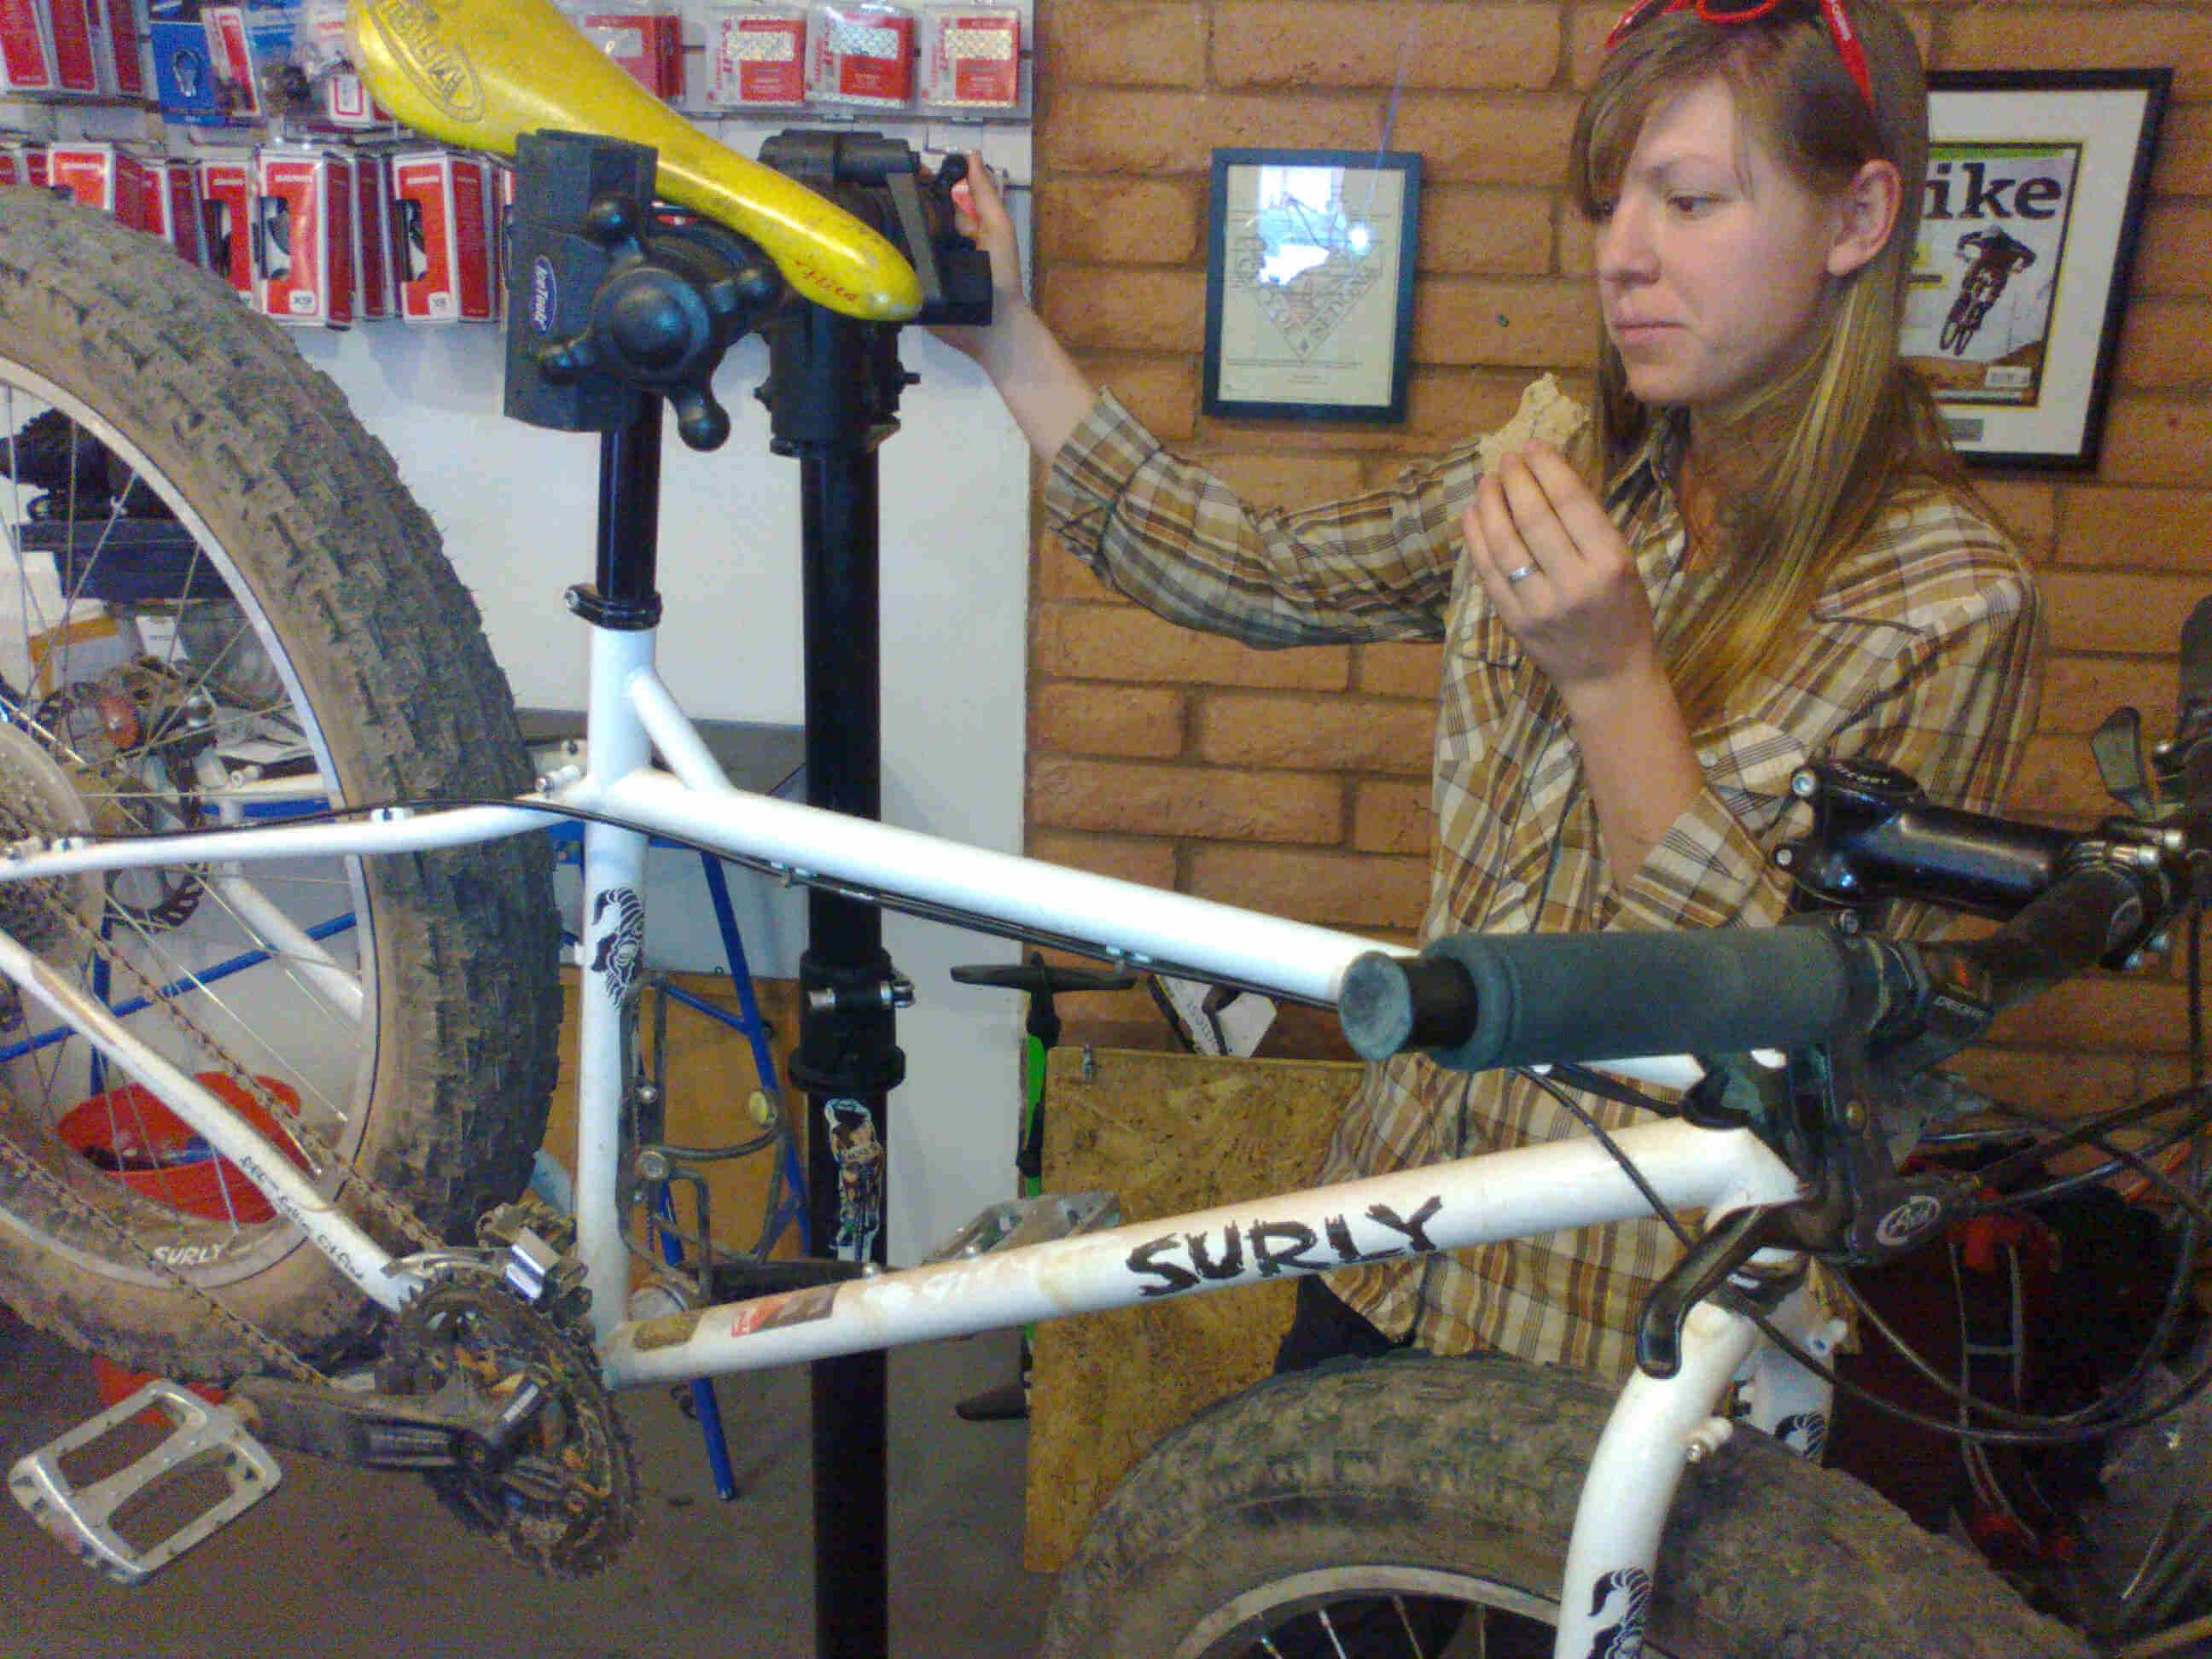 Right side view of a white Surly Pugsley fat bike, on a repair stand in a bike shop, with a person standing behind it